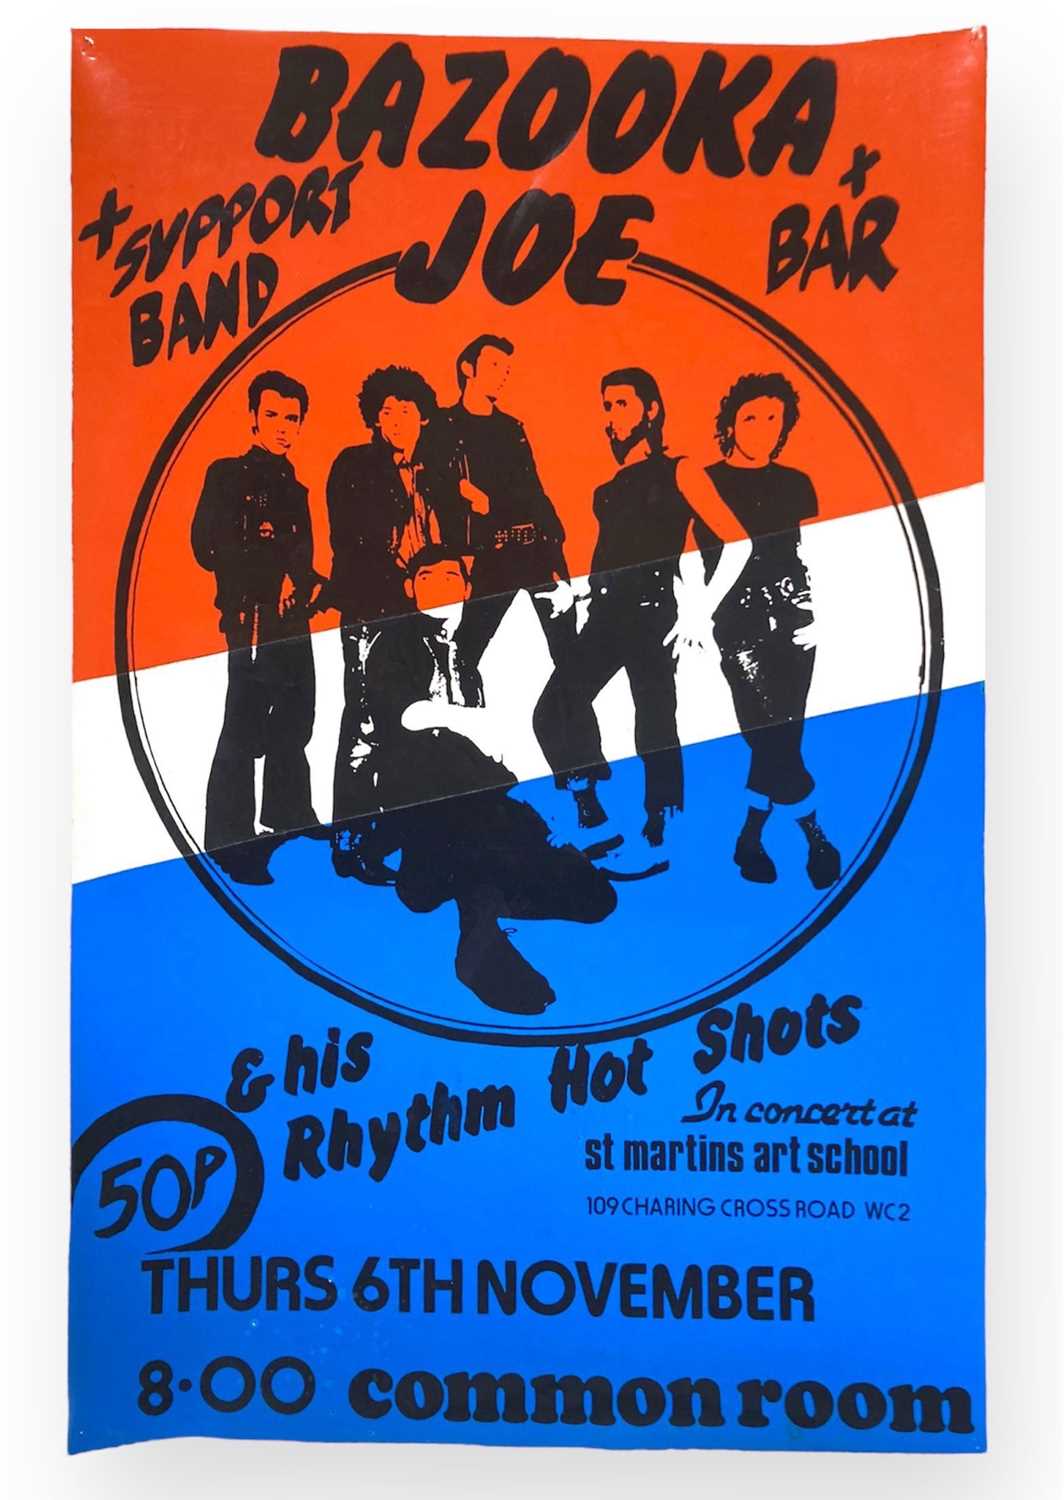 Lot 584 - PUNK HISTORY - A POSTER FOR THE VERY FIRST SEX PISTOLS CONCERT, 6TH NOVEMBER 1975.